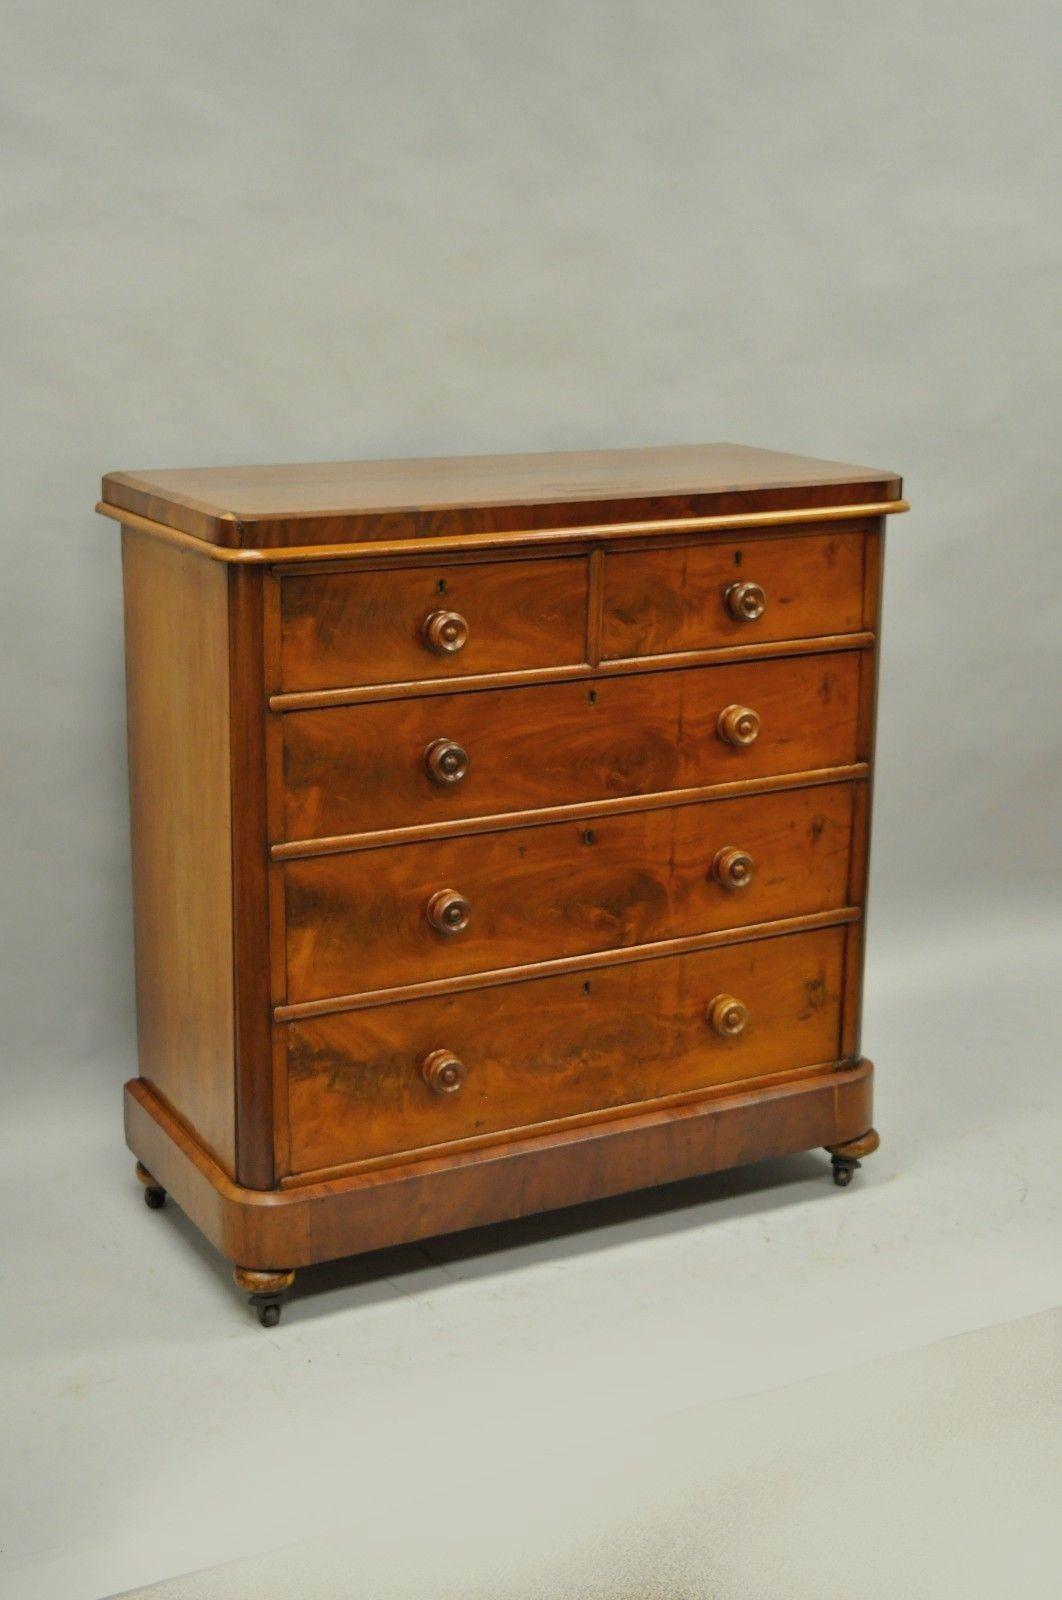 Alfred J Emery antique five-drawer chest. Believed to walnut wood veneer and mahogany. Item features stamped to rear 